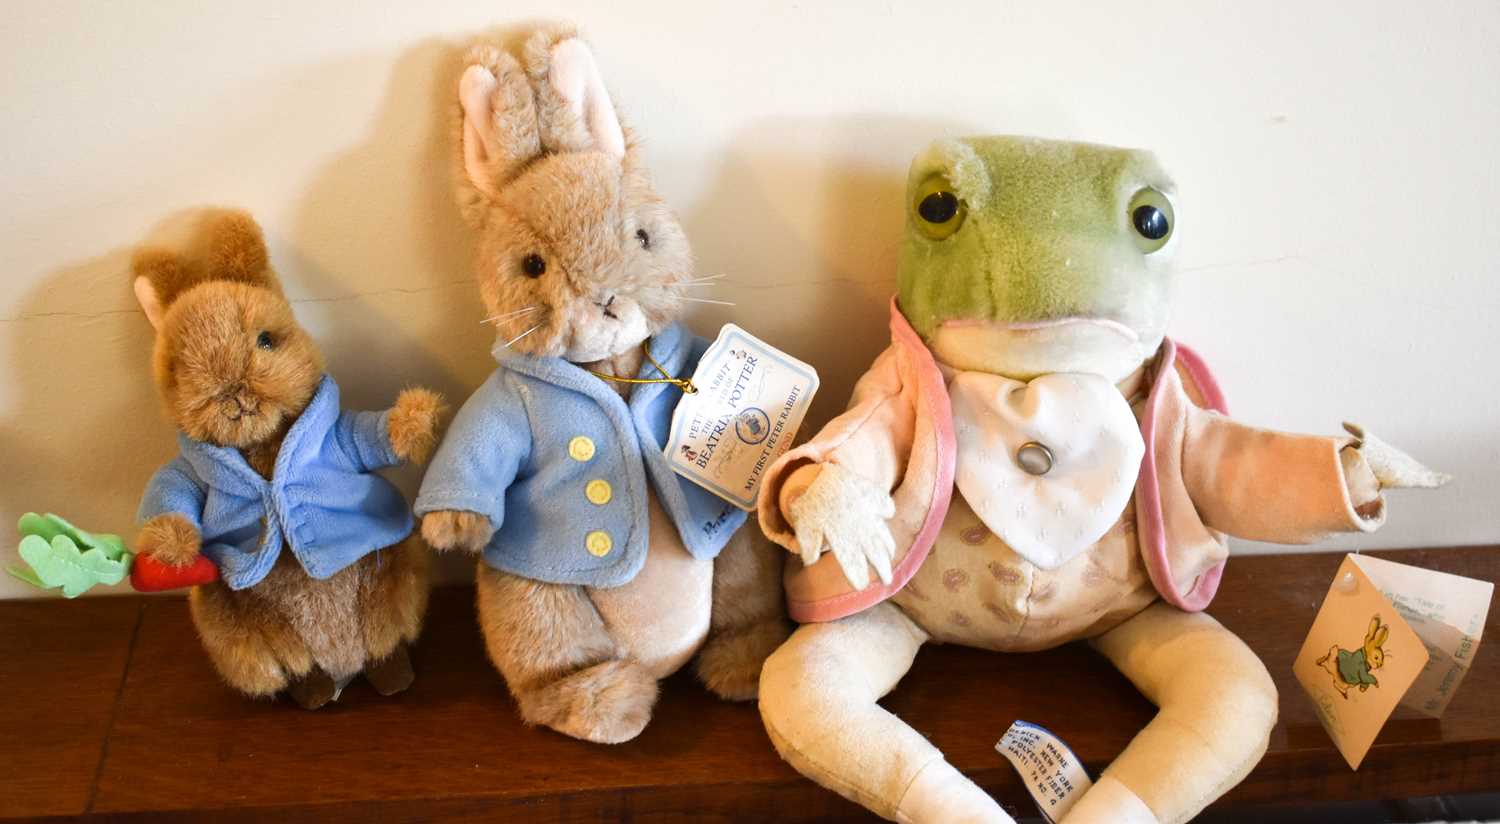 Three Beatrix Potter Peter Rabbit soft toys including Jeremy Fisher and two Peter Rabbits